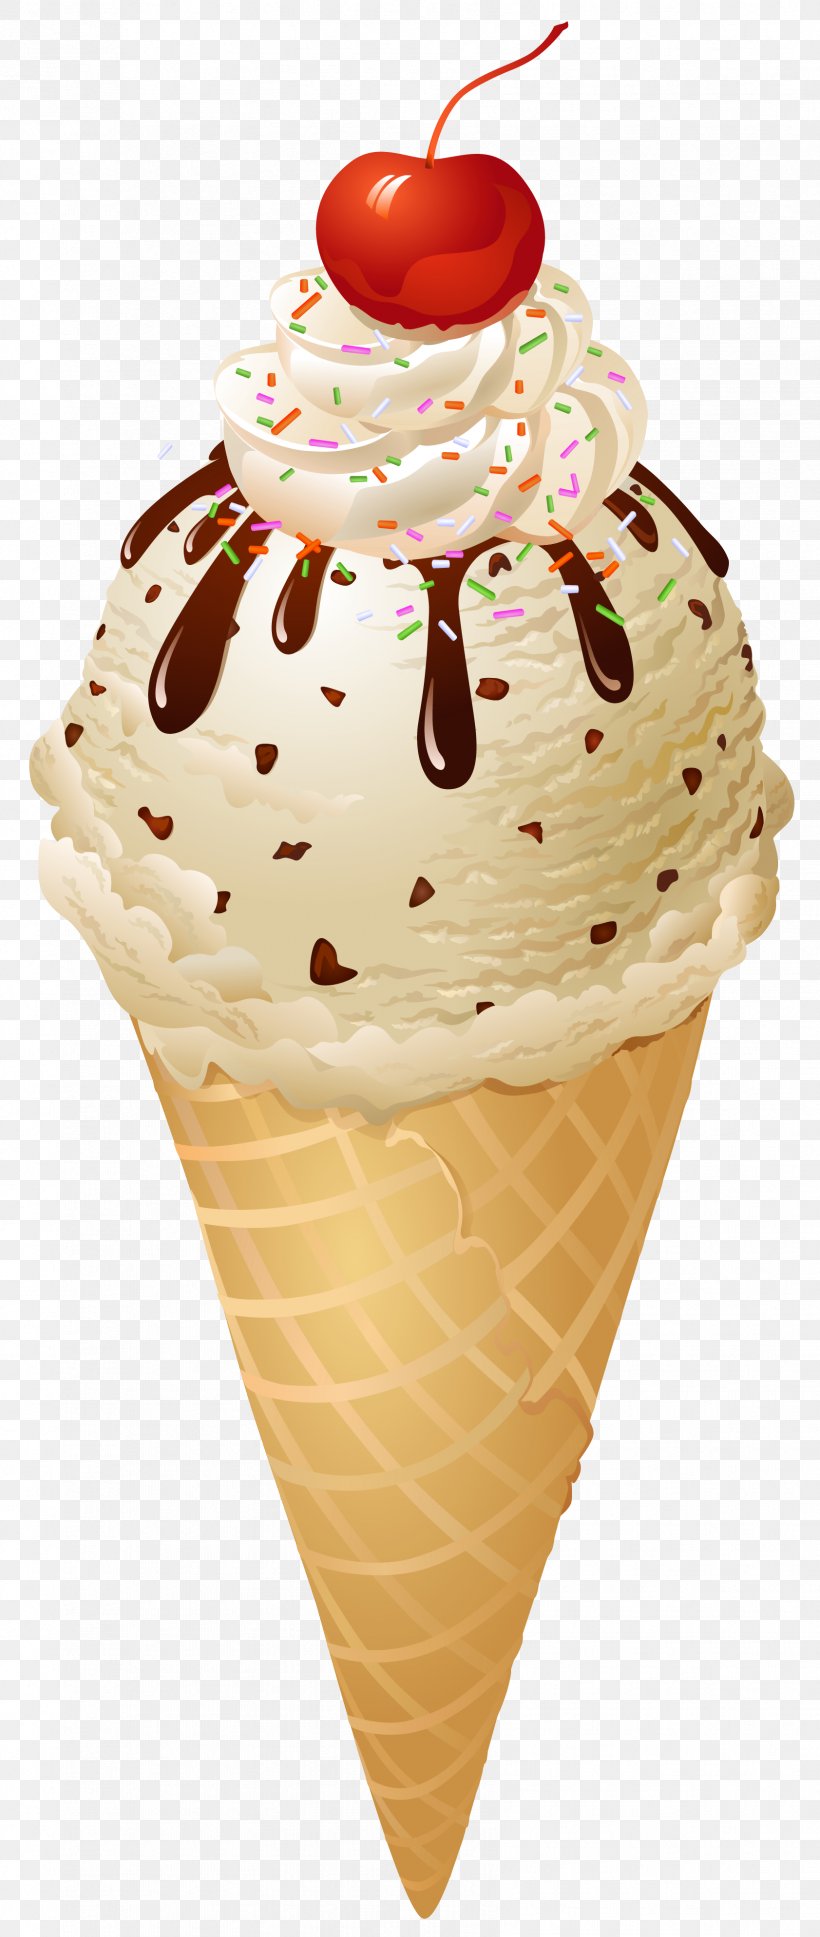 Ice Cream Cone Chocolate Ice Cream, PNG, 1683x3977px, Ice Cream, Apple Pie, Chocolate, Chocolate Ice Cream, Cream Download Free